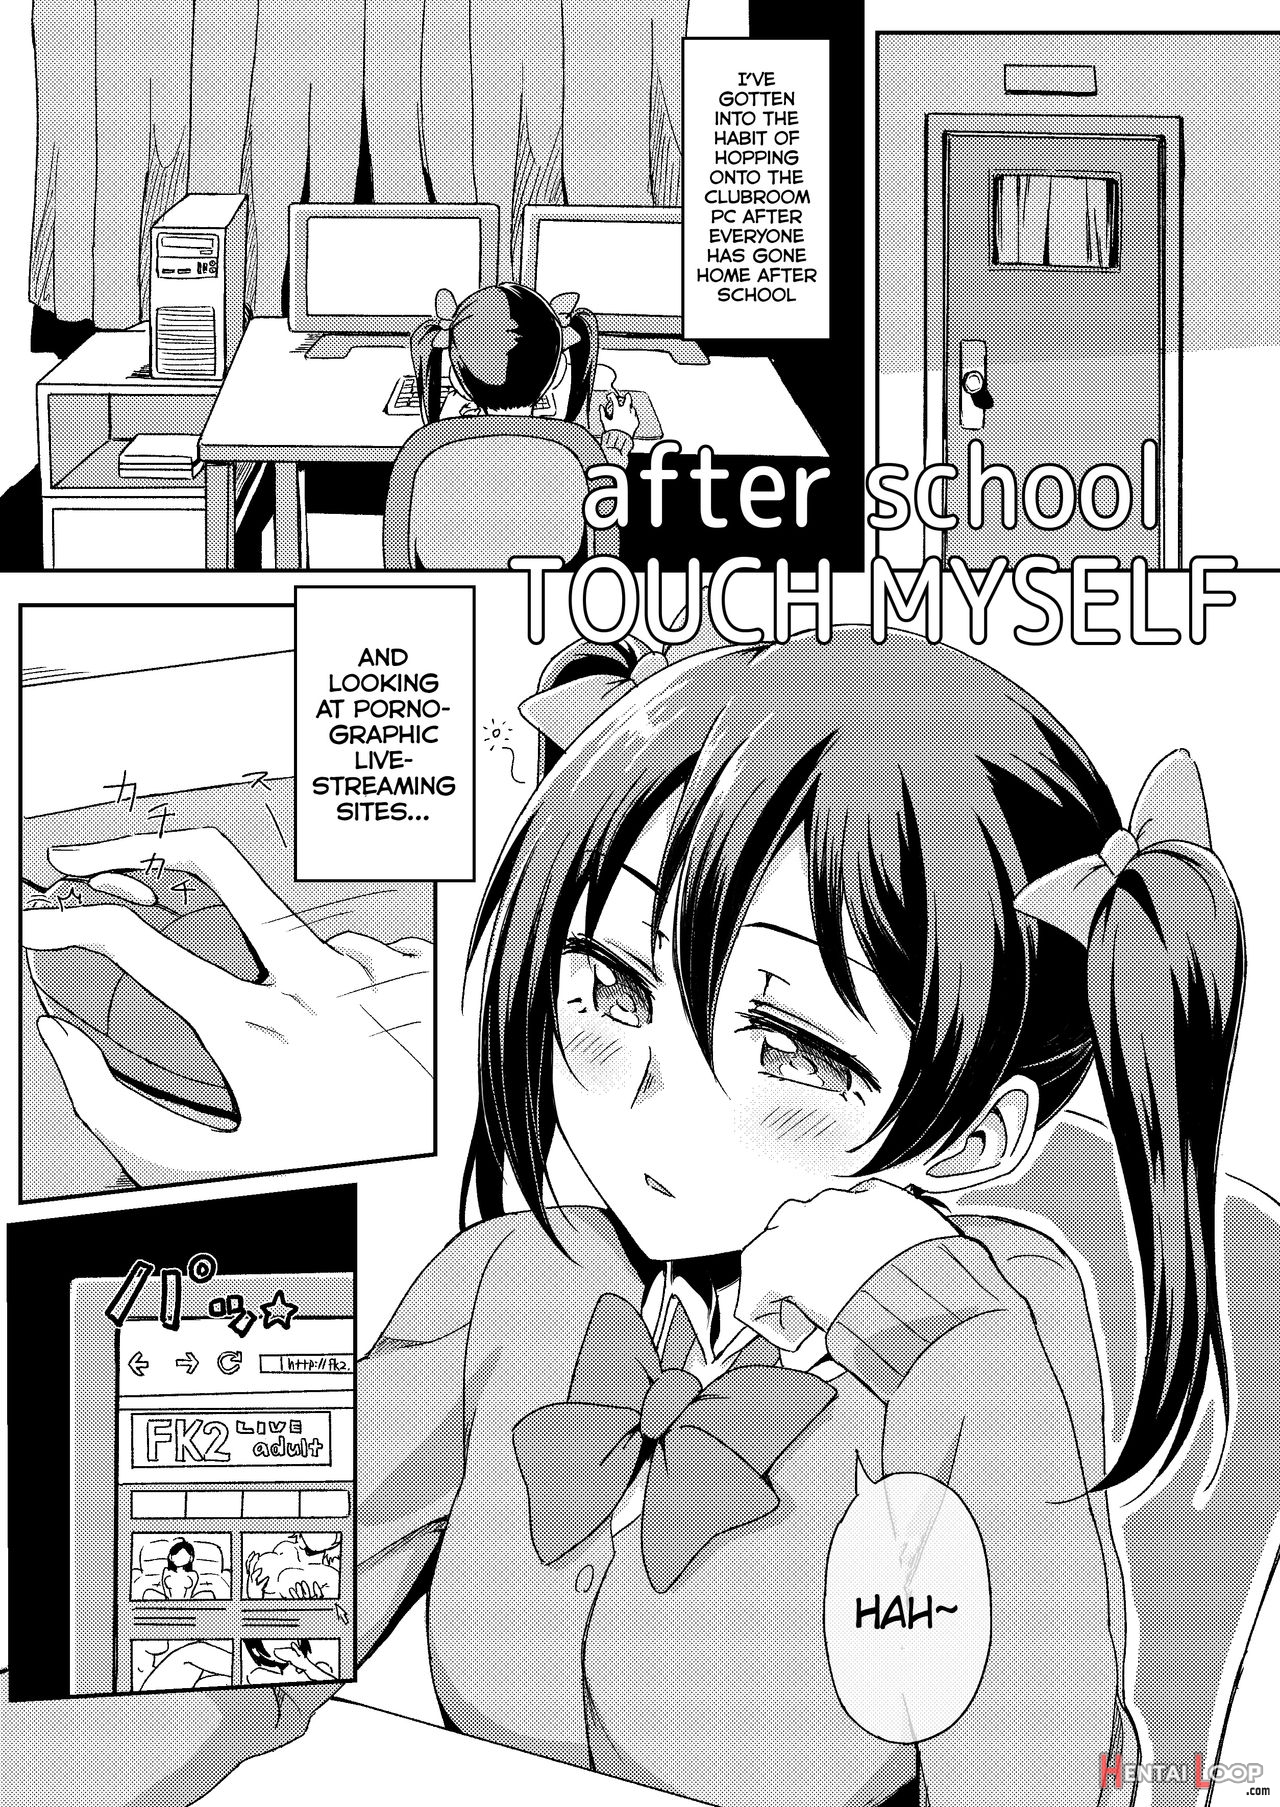 After School Touch Myself page 1